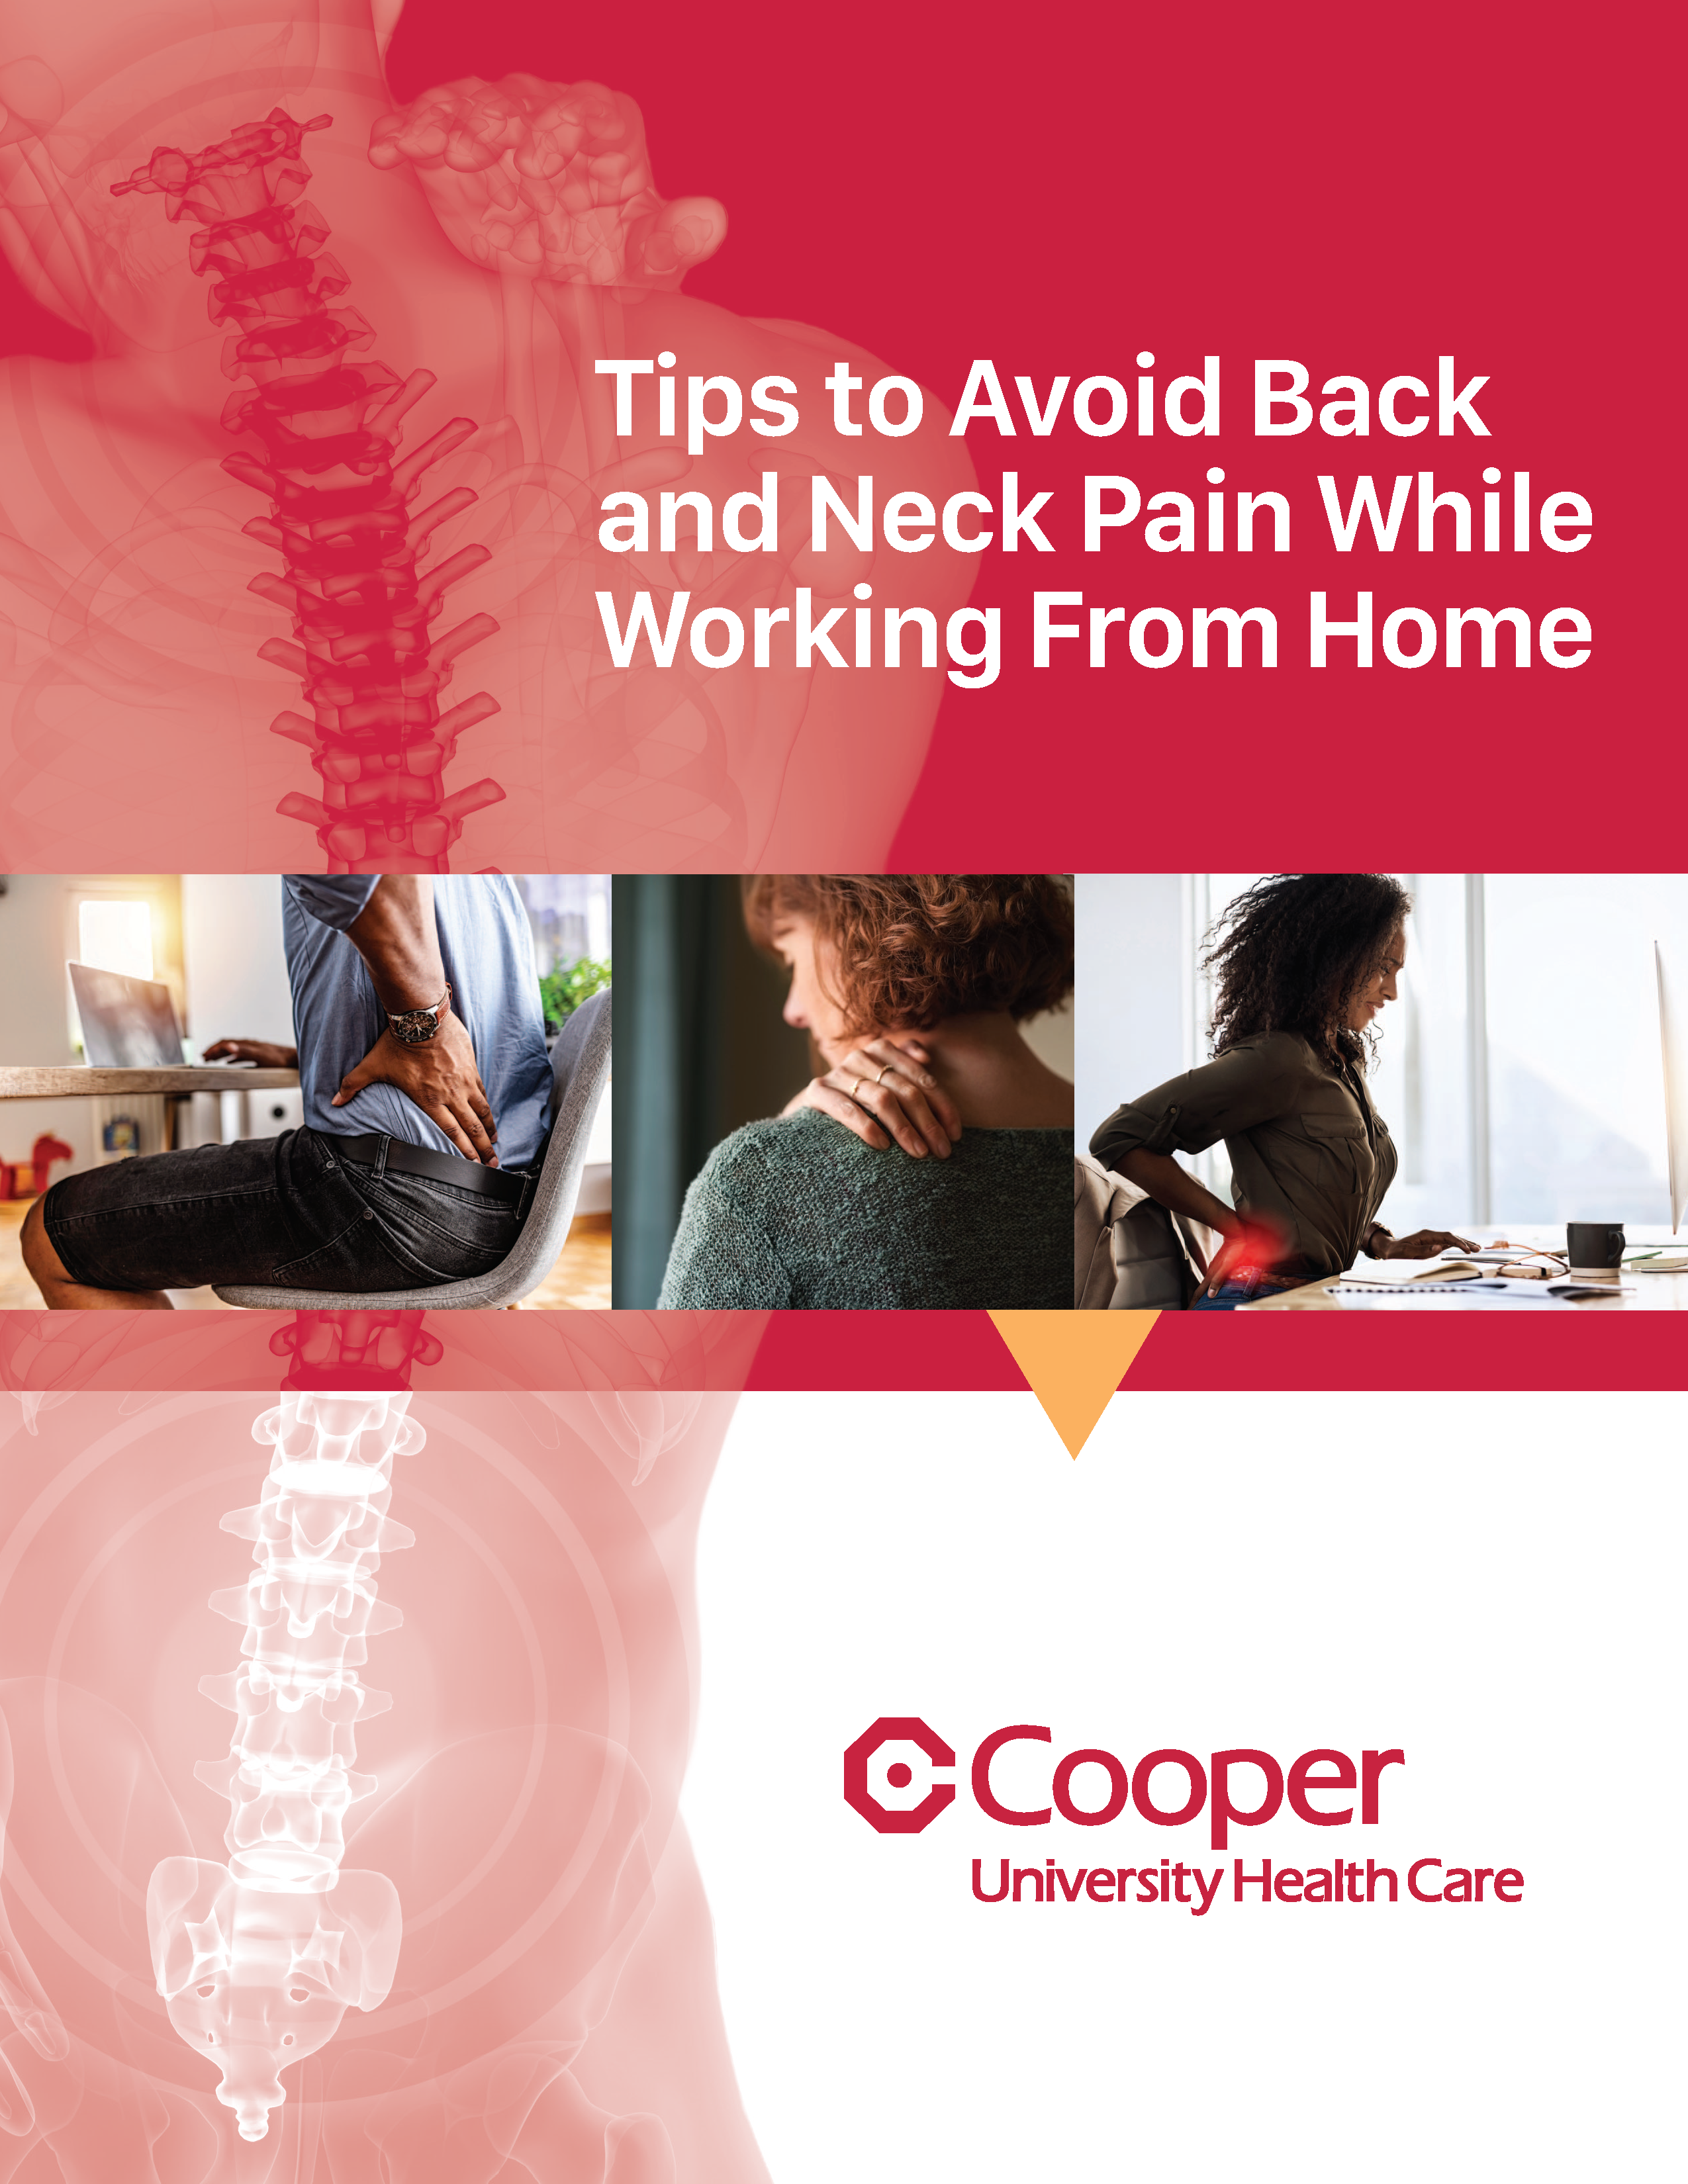 Avoiding Back Pain while Working from Home - eBook cover, image of spine, woman holding neck in pain